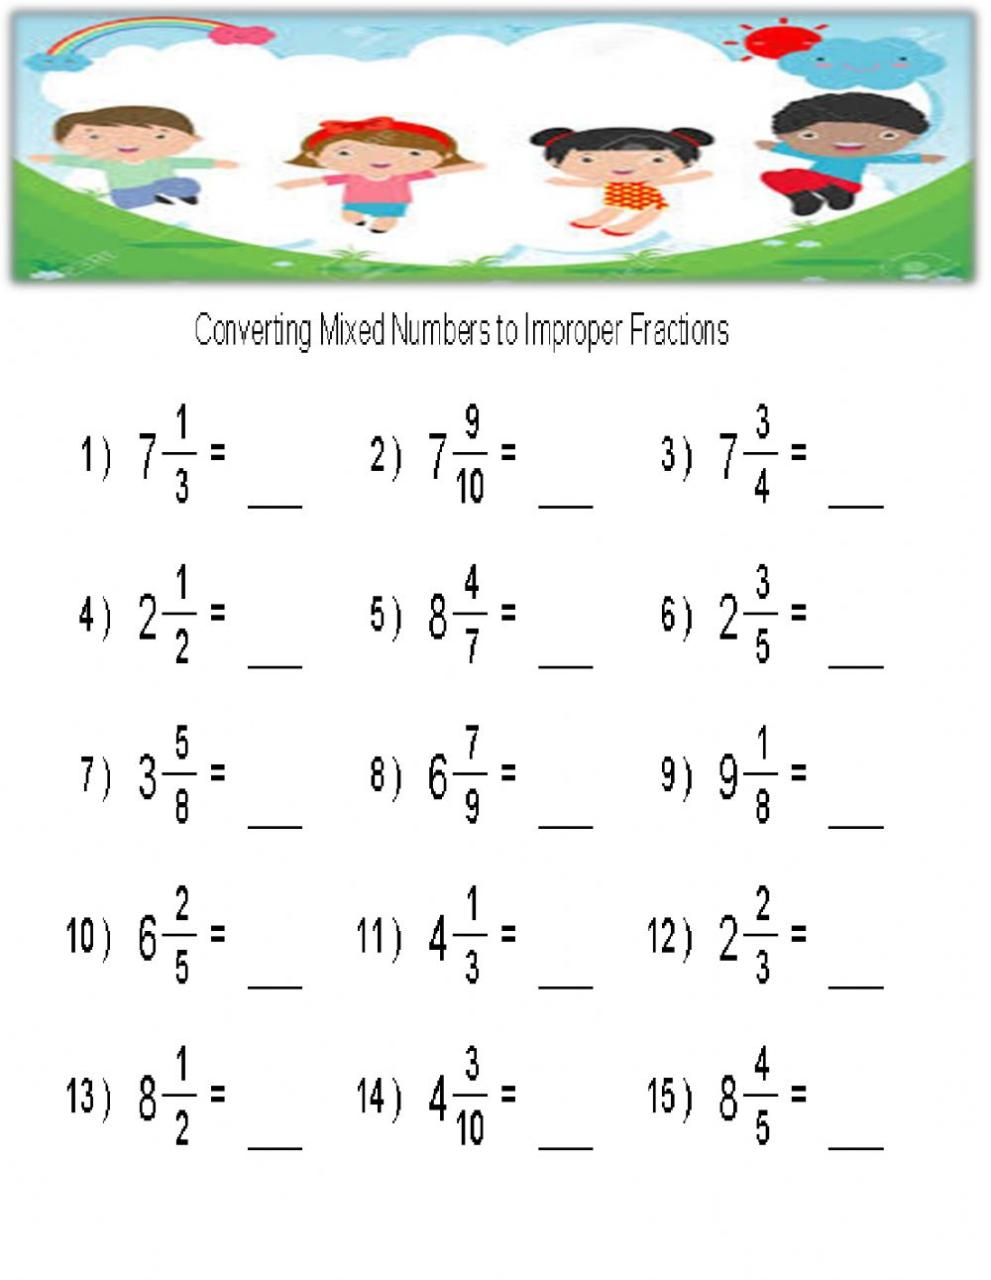 Complex Fractions Worksheet With Answers Pdf